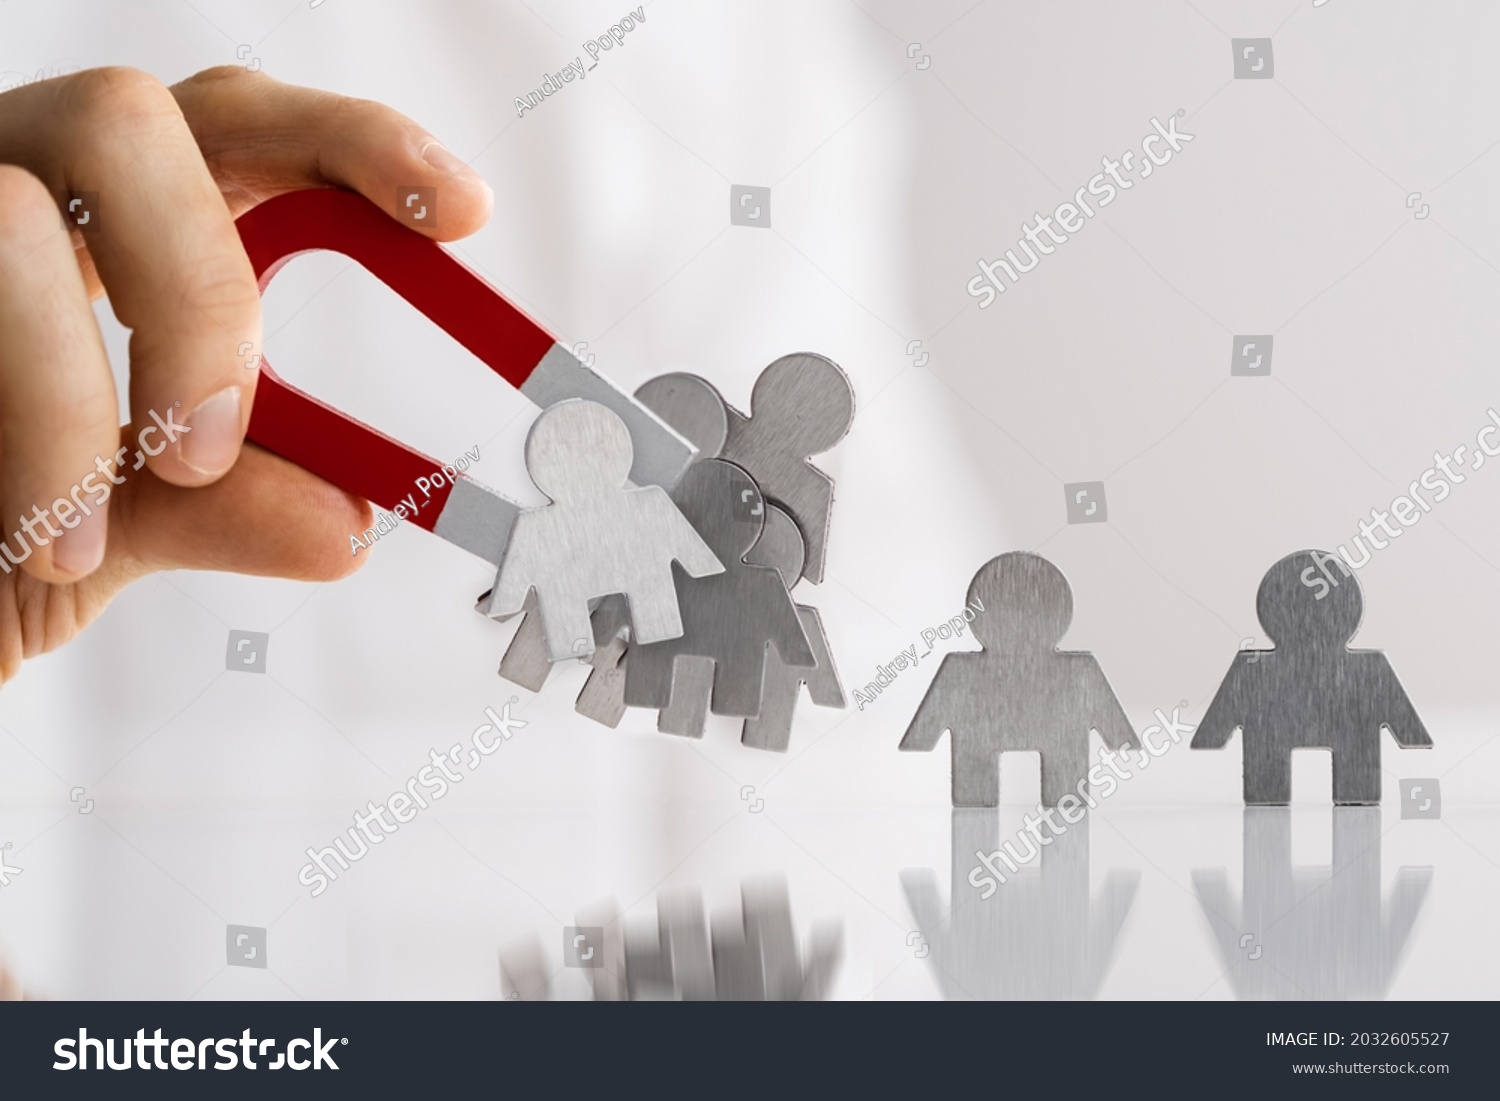 221918 Attract Candidates Images Stock Photos And Vectors Shutterstock